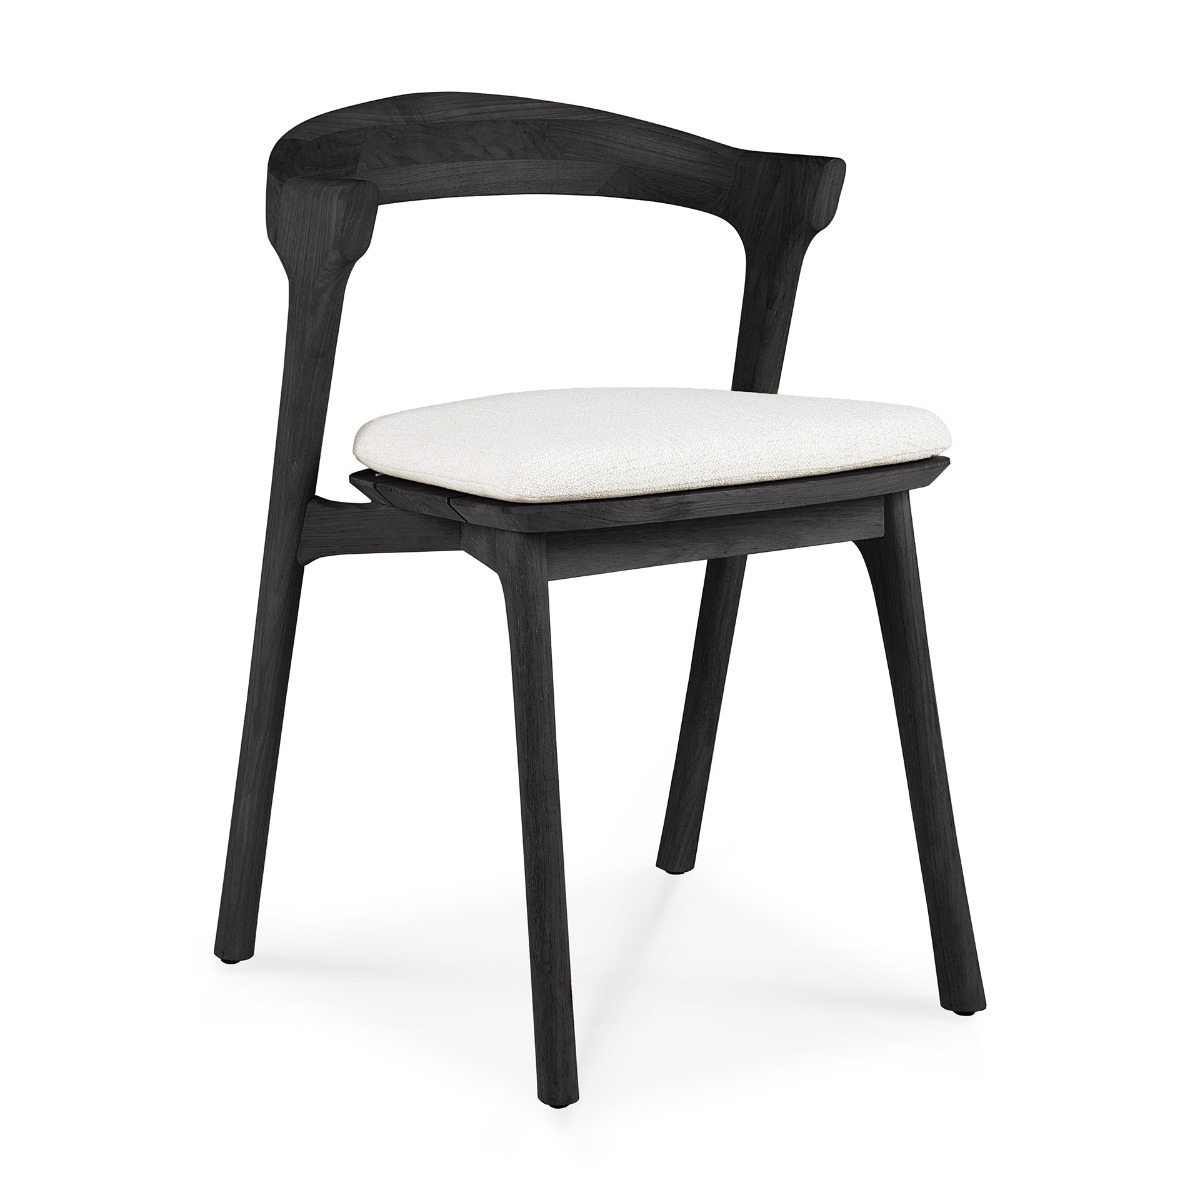 Teak Bok Black outdoor dining chair with cushion off white